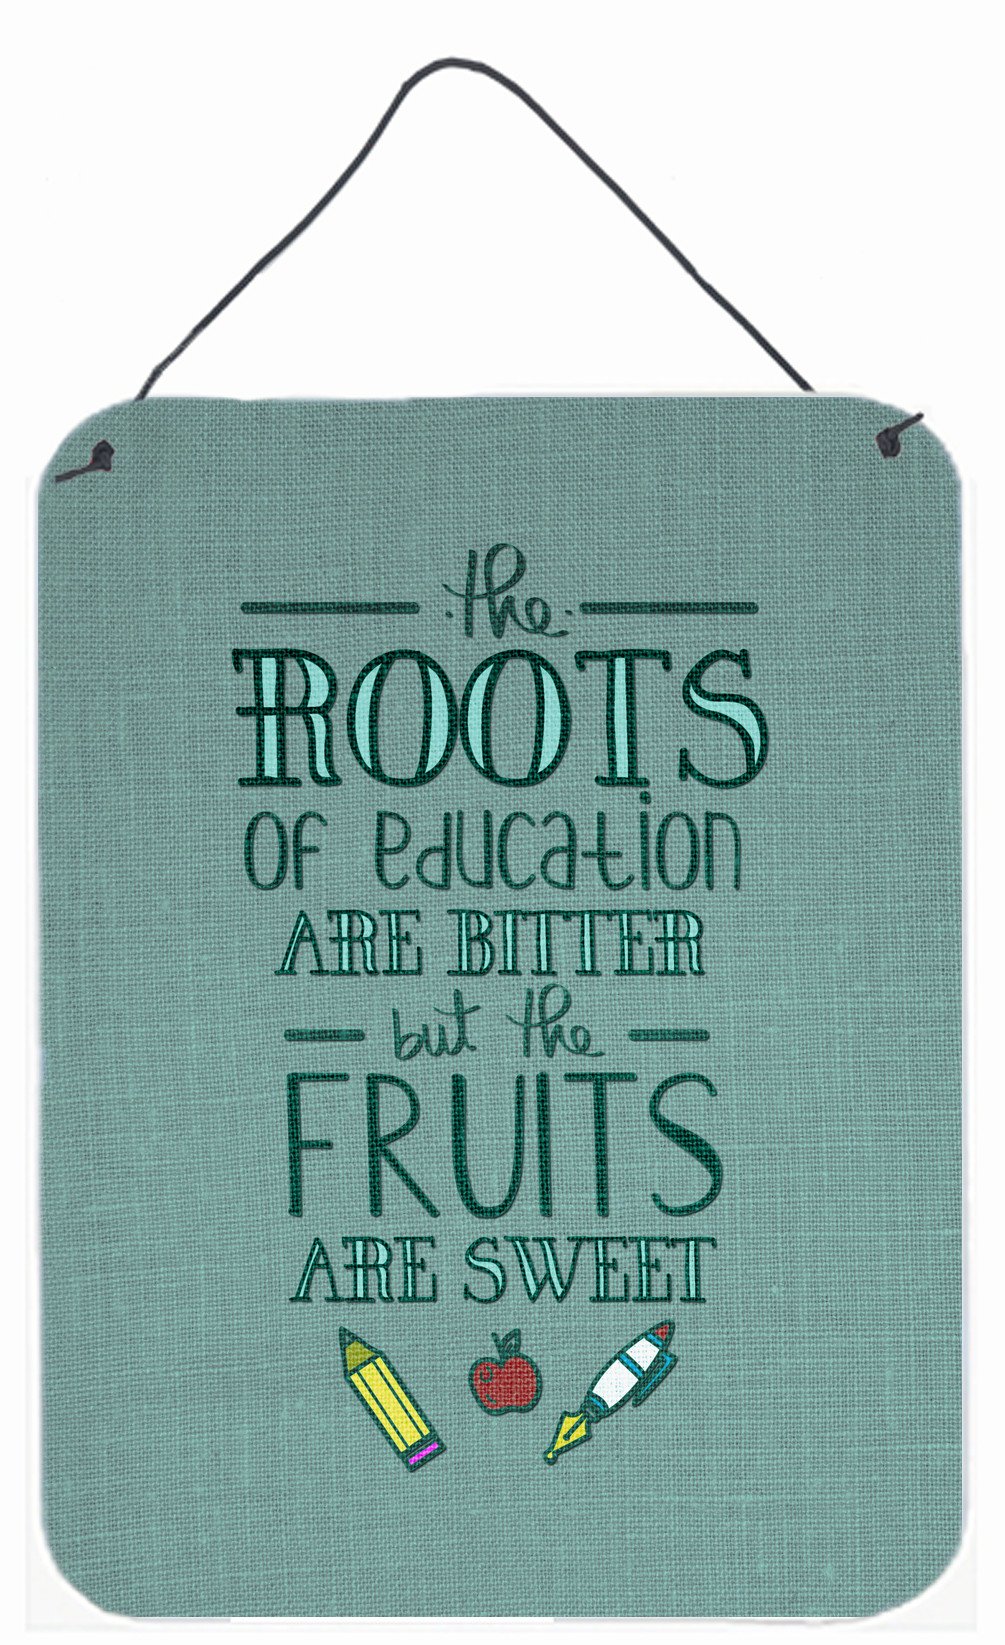 Education Fruits are Sweet Teacher Wall or Door Hanging Prints BB5474DS1216 by Caroline's Treasures